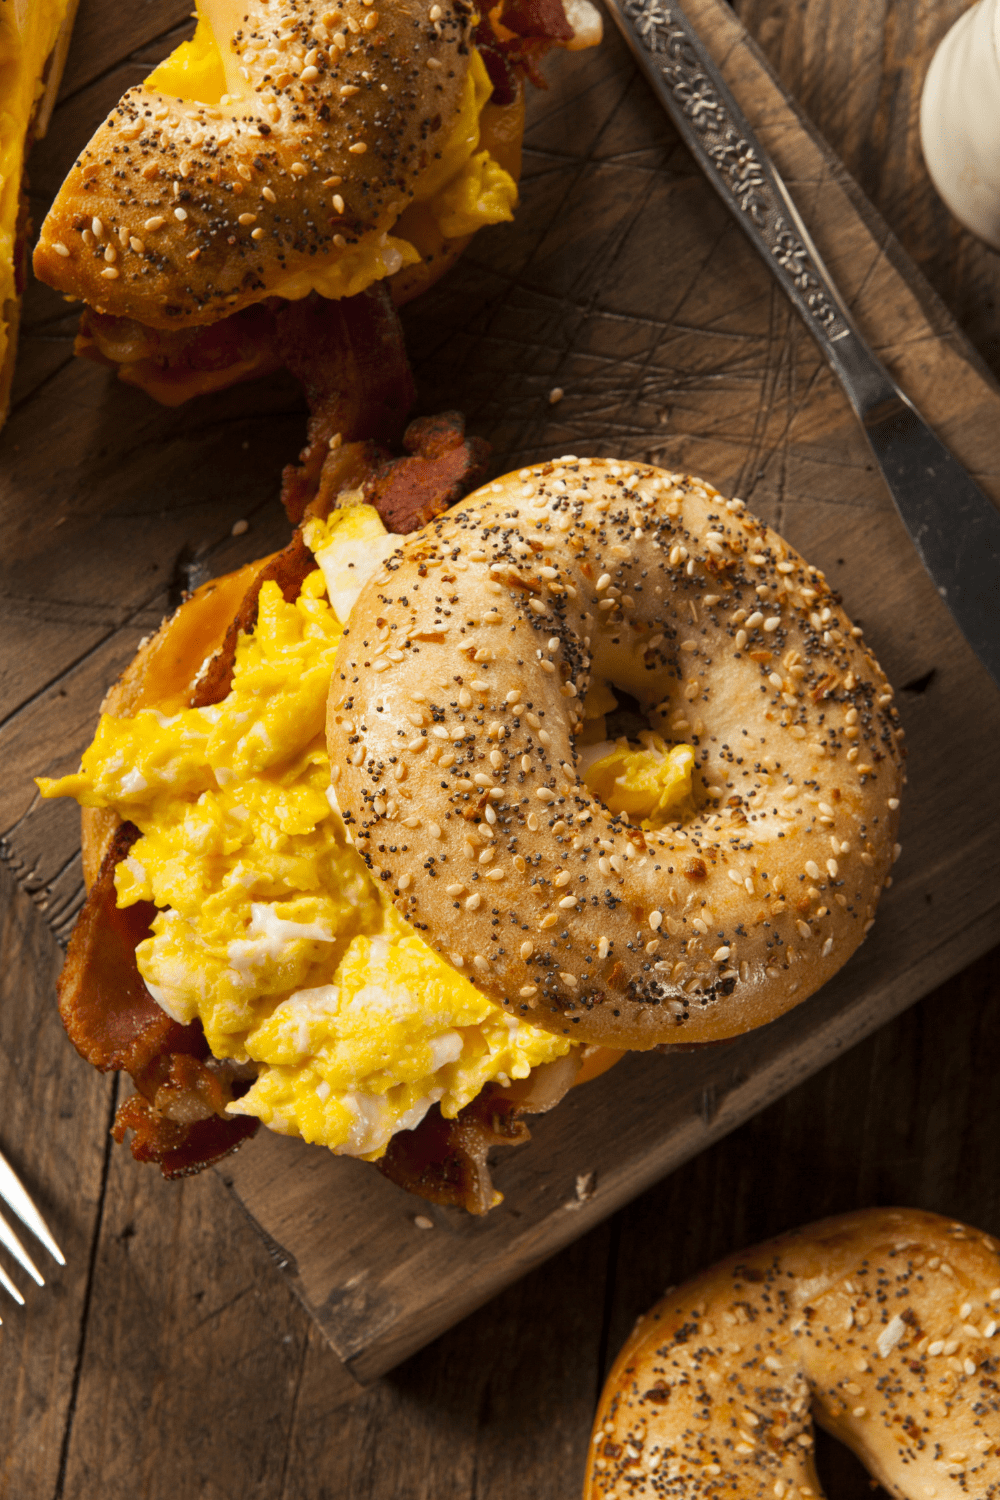 Homemade Breakfast Bagel Sandwich with Bacon, Egg and Sesame Seeds